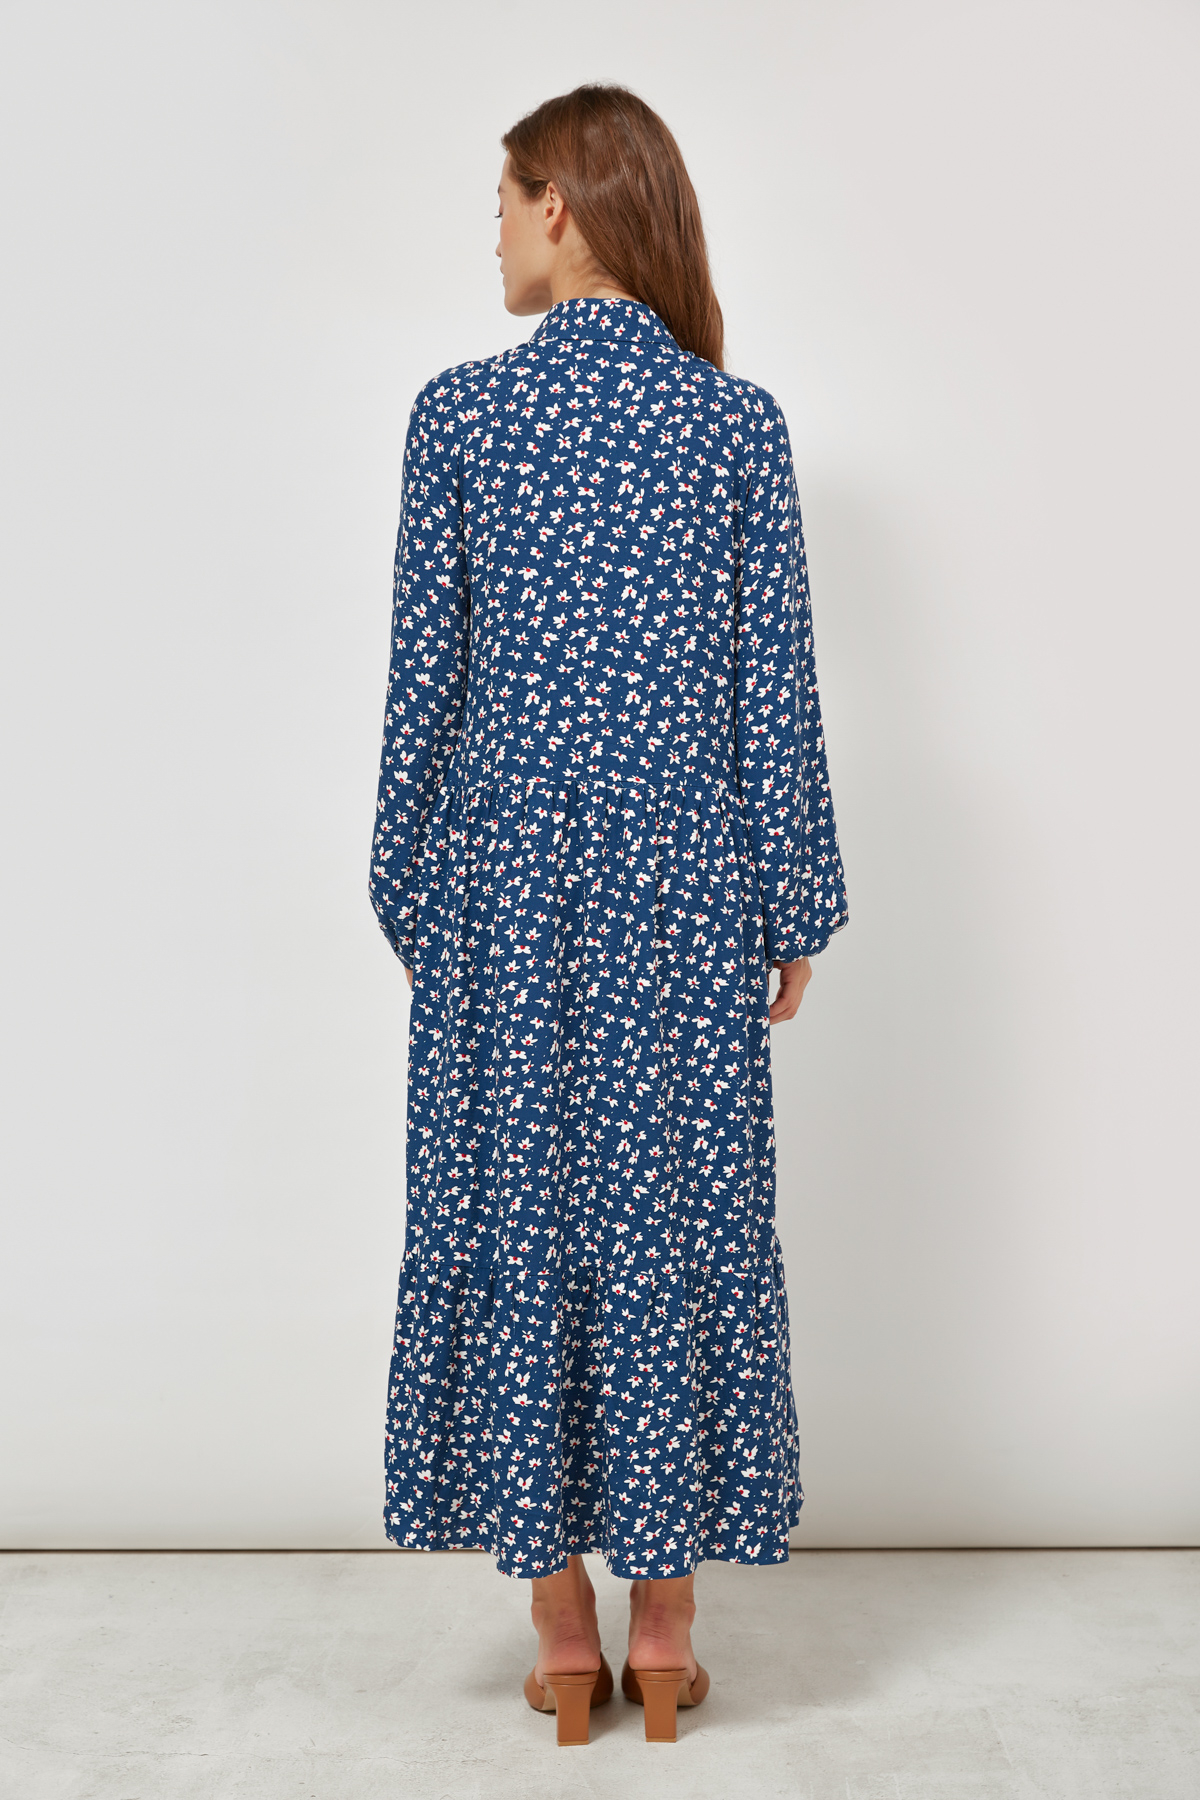 Loose-fit viscose dress in navy blue in print, photo 4